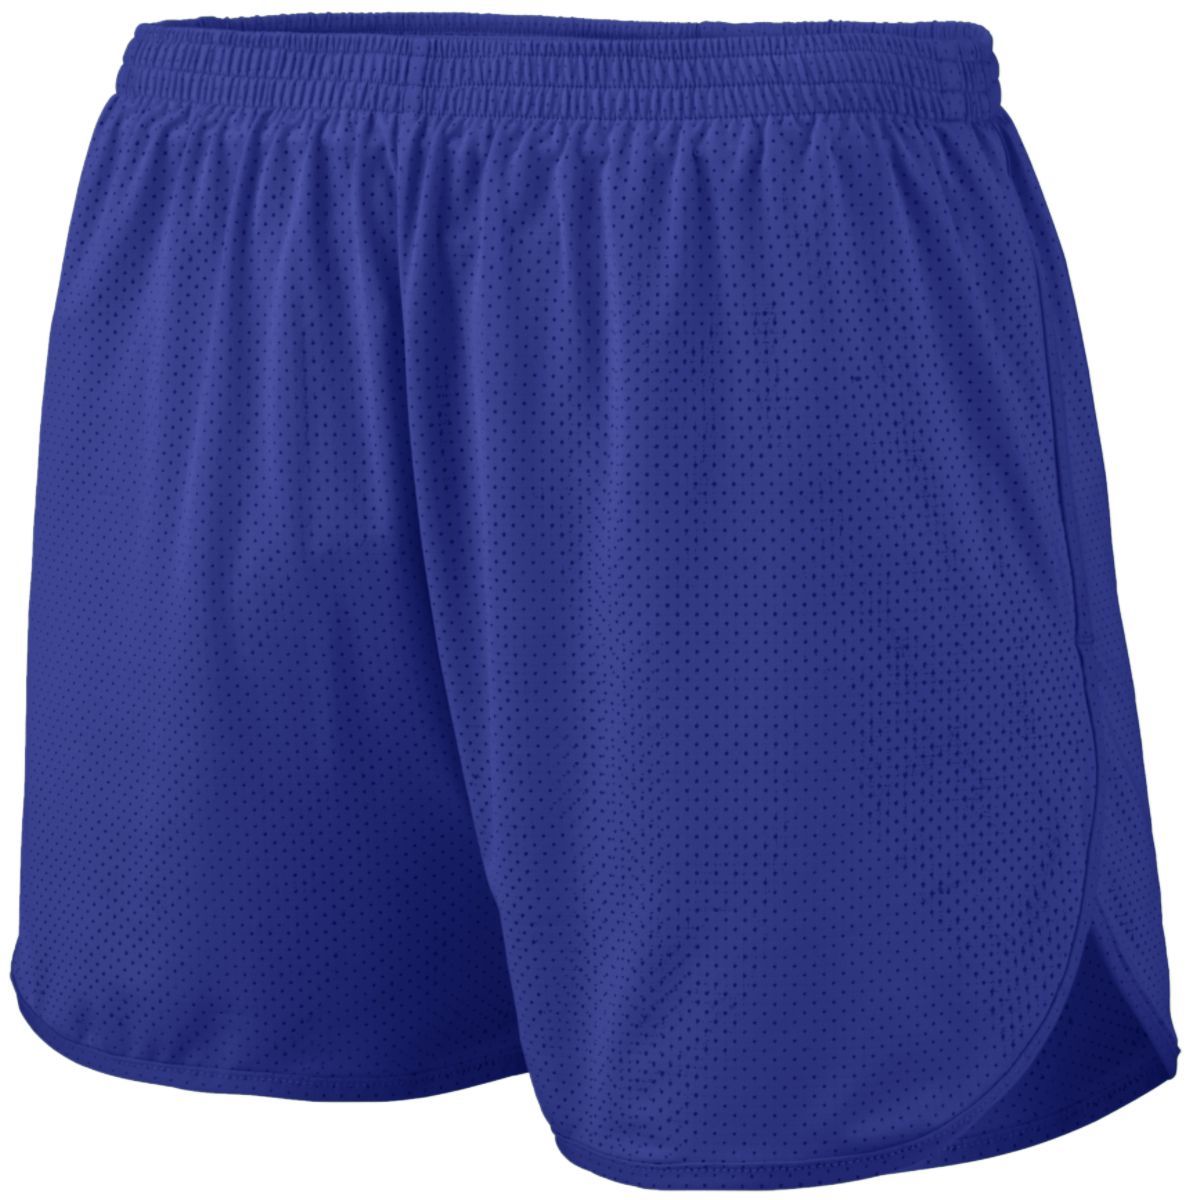 Augusta Sportswear Solid Split Shorts in Purple  -Part of the Adult, Adult-Shorts, Augusta-Products, Track-Field product lines at KanaleyCreations.com